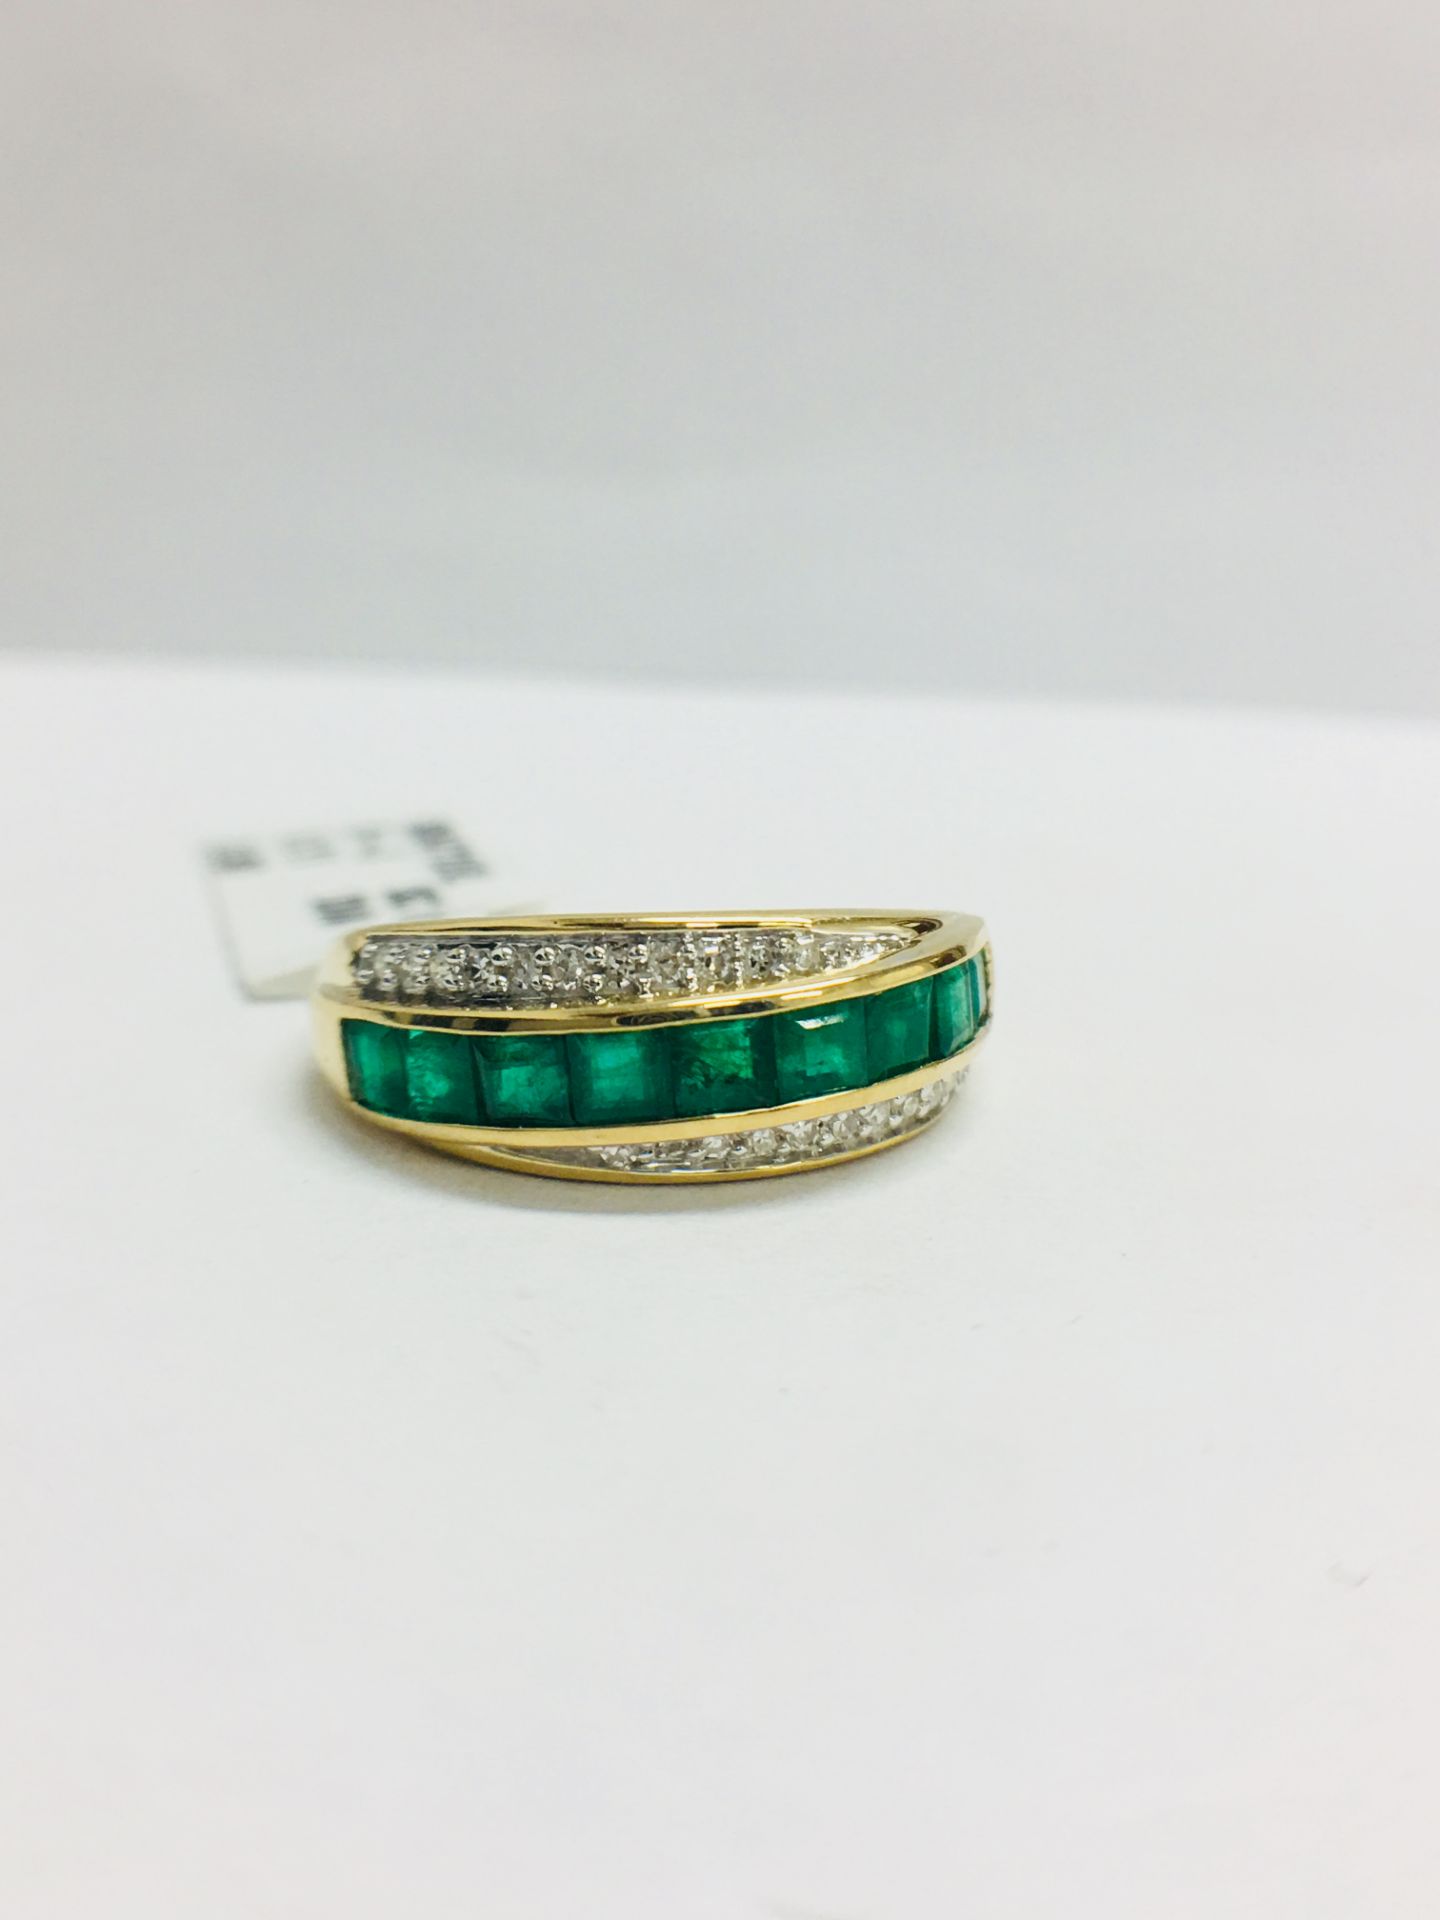 9Ct Yellow Gold Diamond Emerald Crossover Style Ring - Image 7 of 7